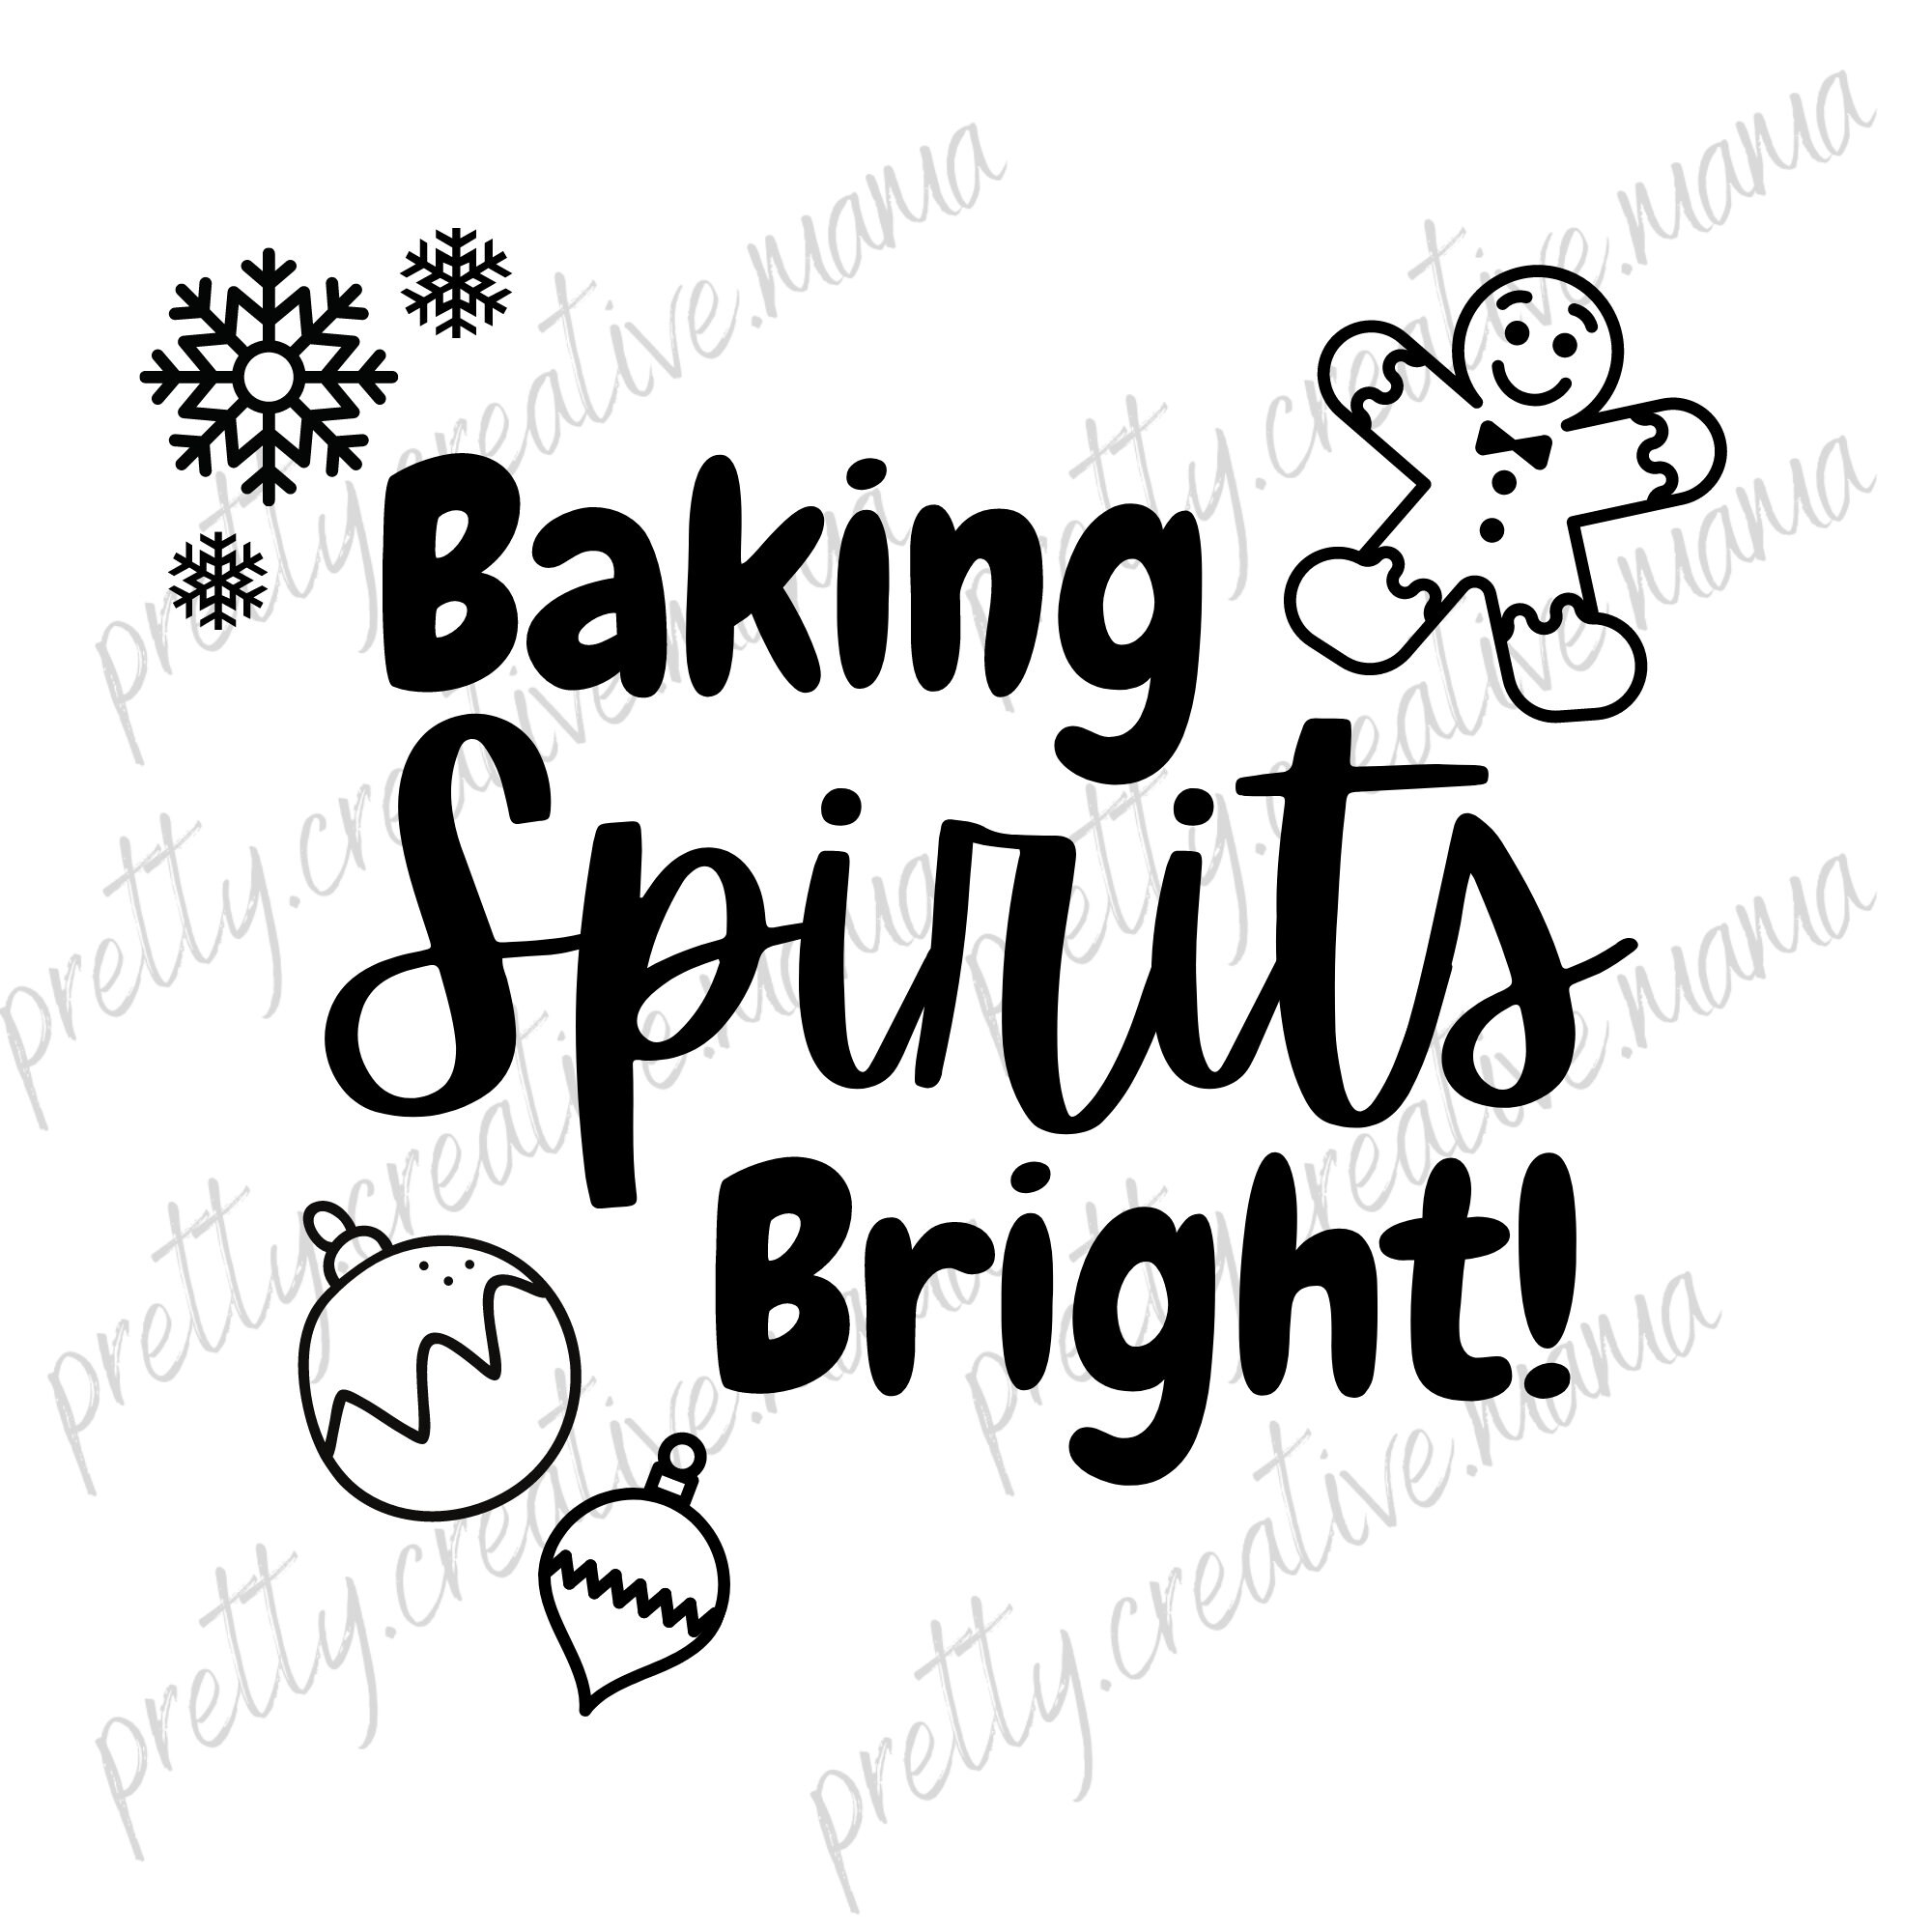 Baking Spirits Bright: Easy Gifts with FREE Printables - Crisp Collective